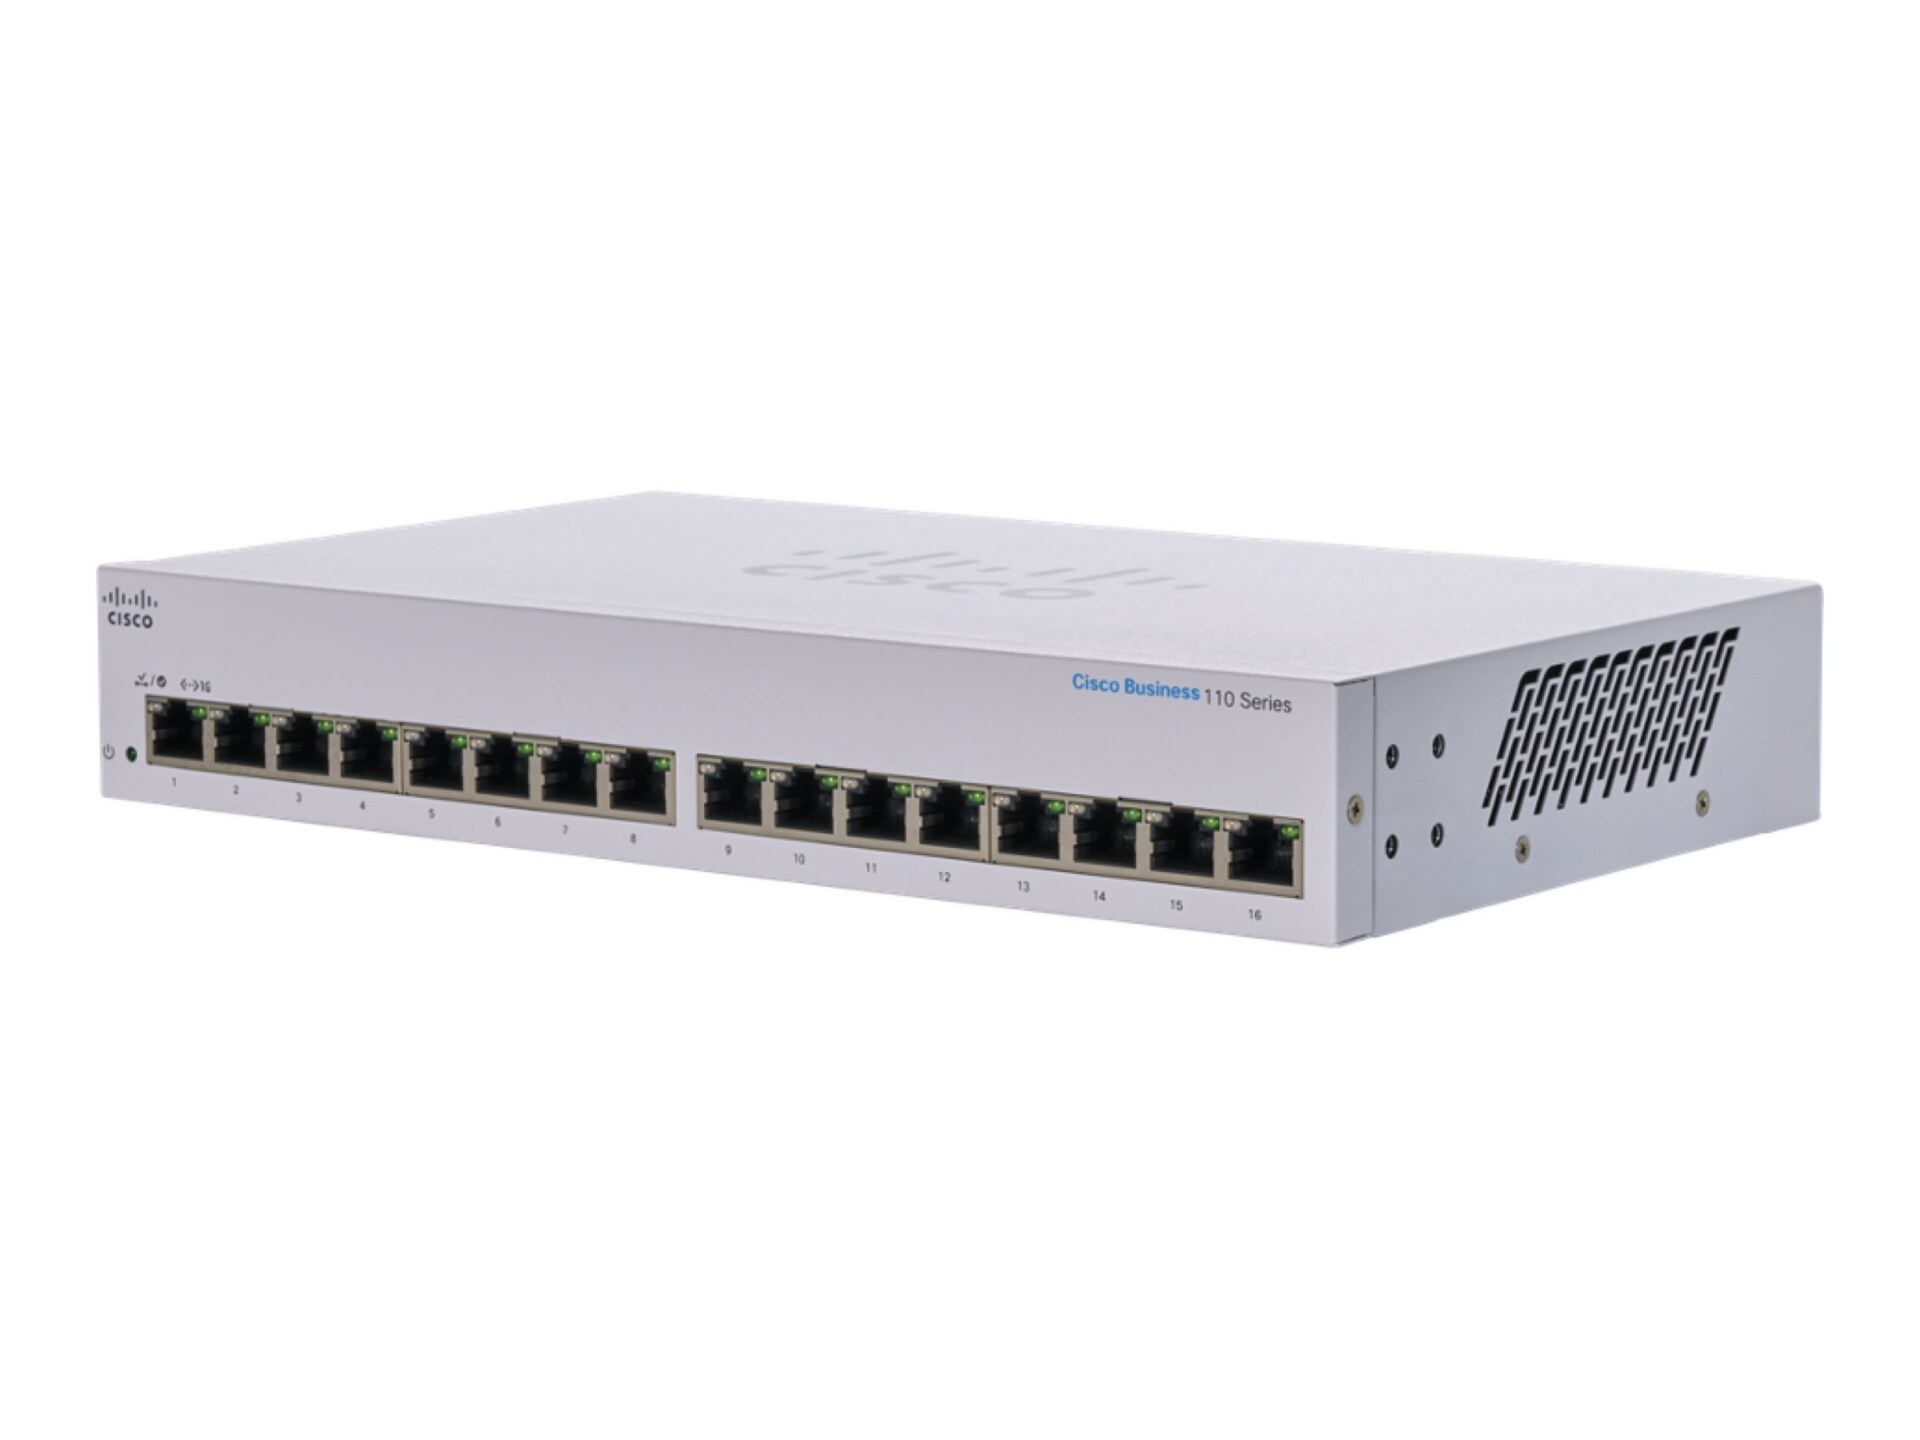 Cisco Business 110 Series 110-16T - switch - 16 ports - unmanaged - rack-mo